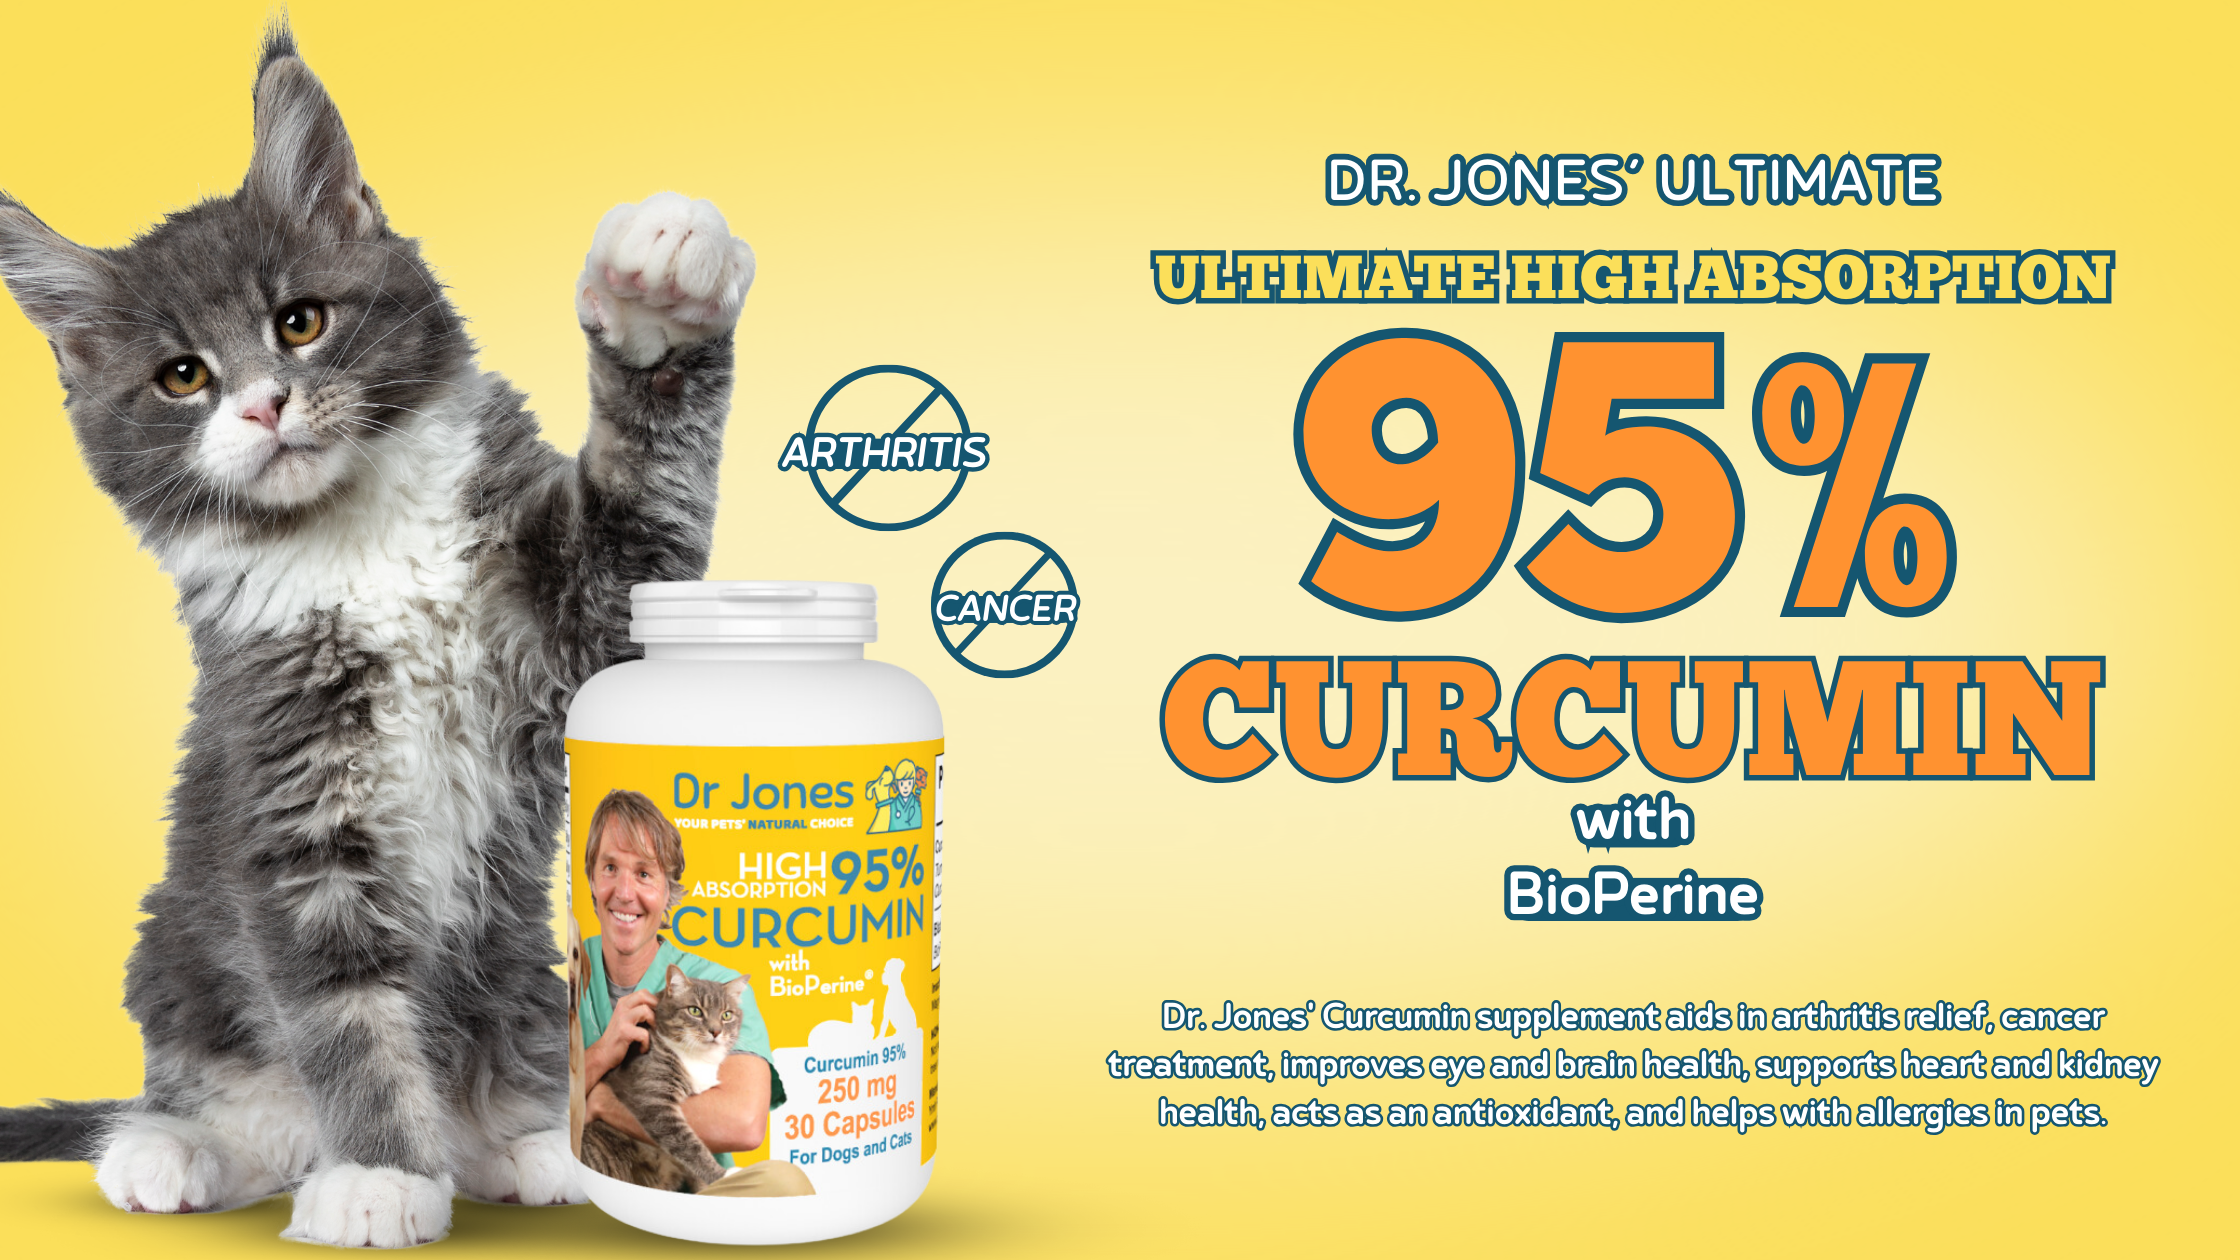 Dr. Jones' Ultimate High Absorption 95% Curcumin is Non-GMO and gluten free, and contains no wheat, corn, soy, or any artificial colors, flavors, or preservatives. The supplement is in capsule form (powder in capsules), containing 250mg Curcumin (BCM-95® ~ Curcugreen®) per capsule, with 30 capsules per ja